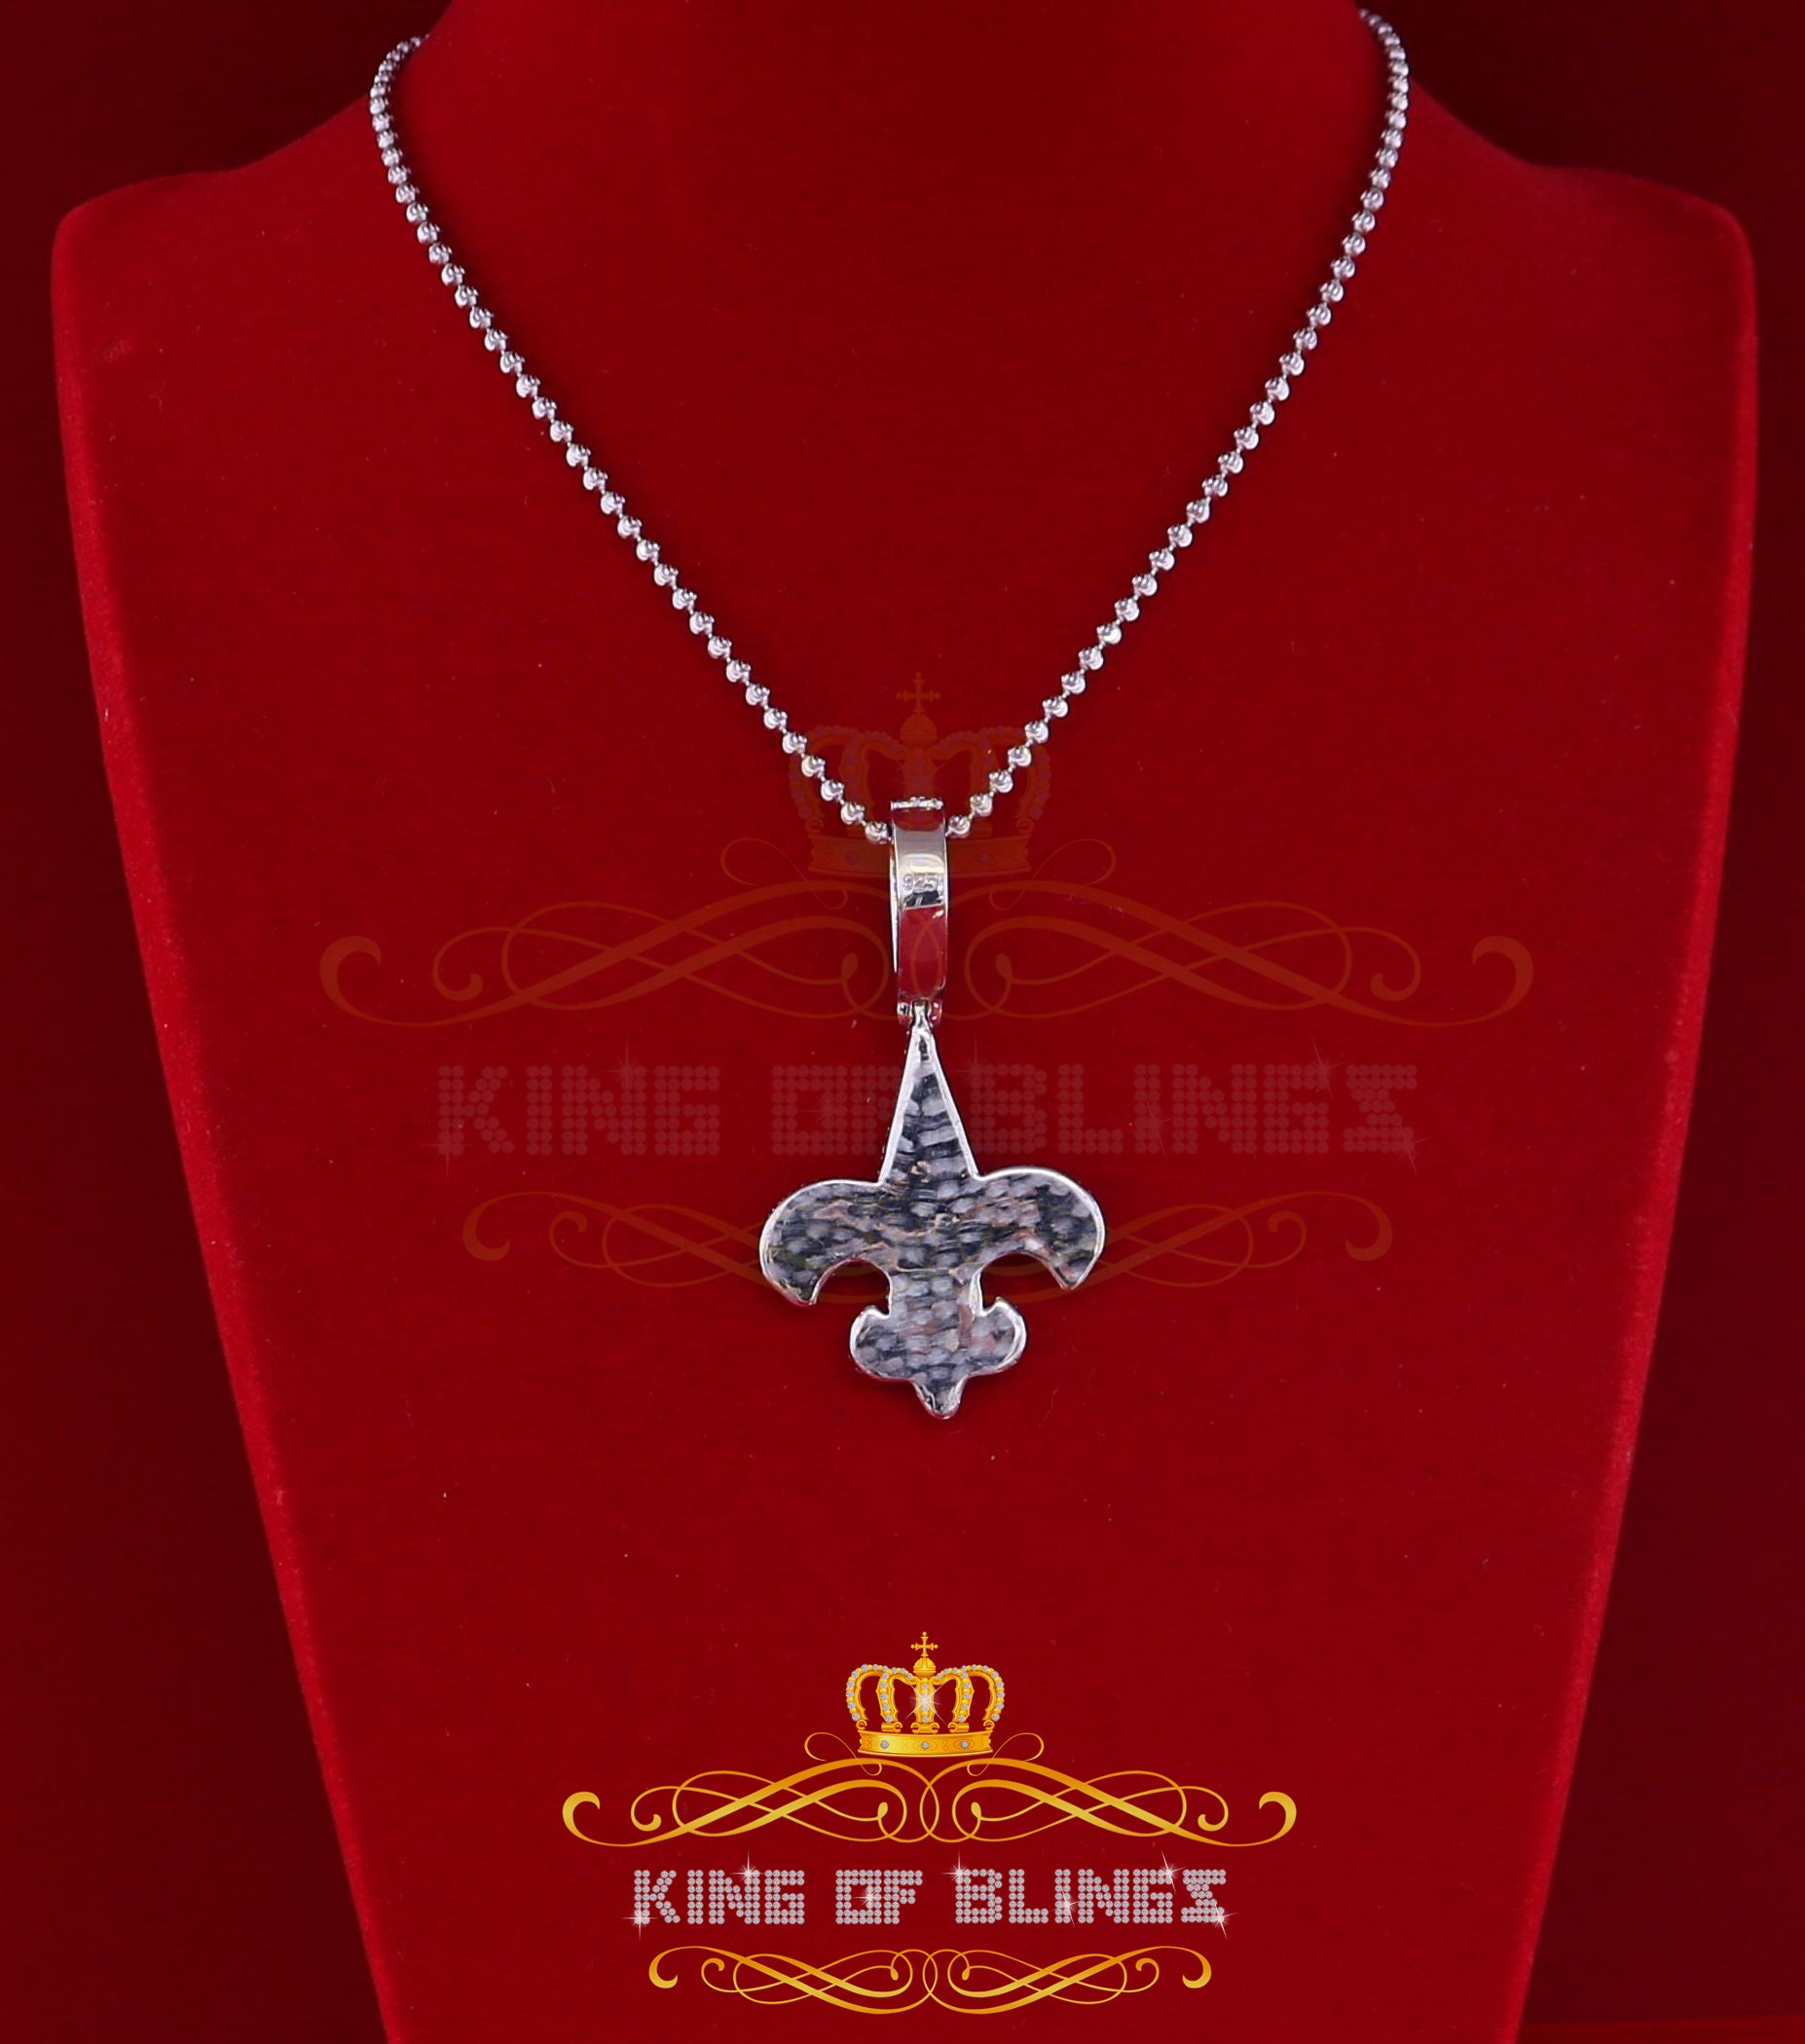 925 Sterling Rosy Silver Fleur de Lis White Pendant with 7.04ct Cubic Zirconia KING OF BLINGS